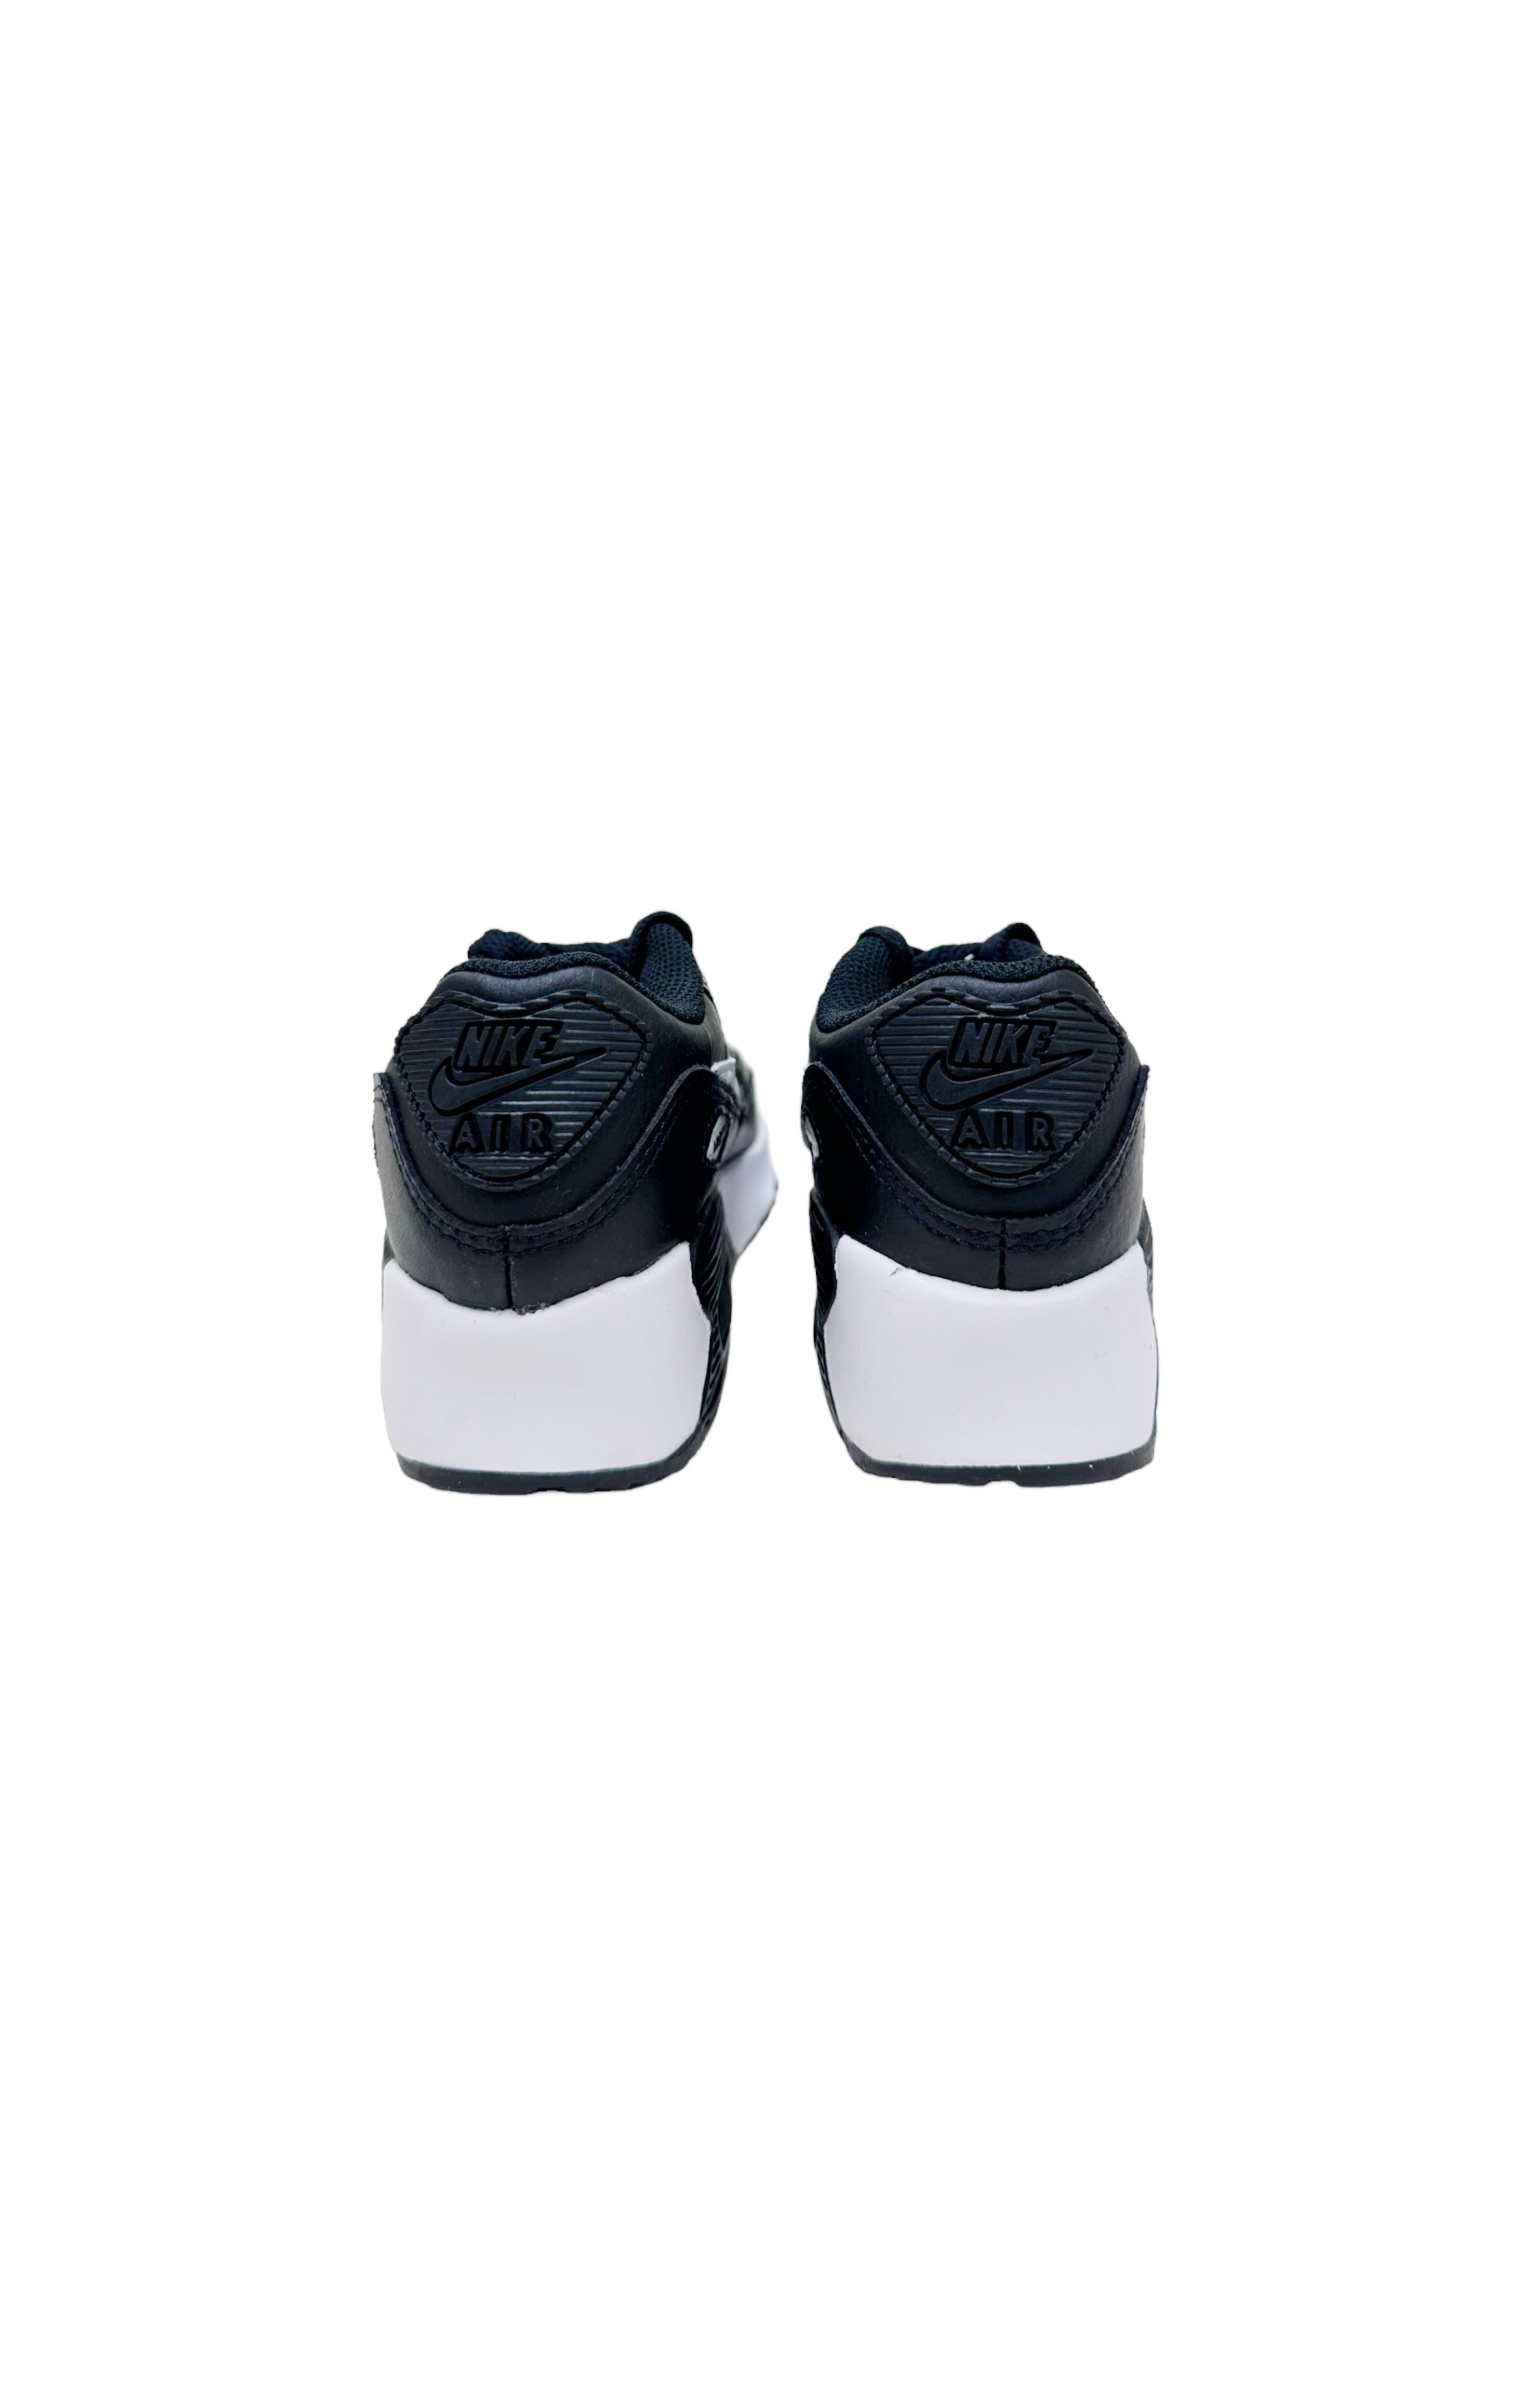 NIKE (NEW) Sneakers Size: Toddler US 11C